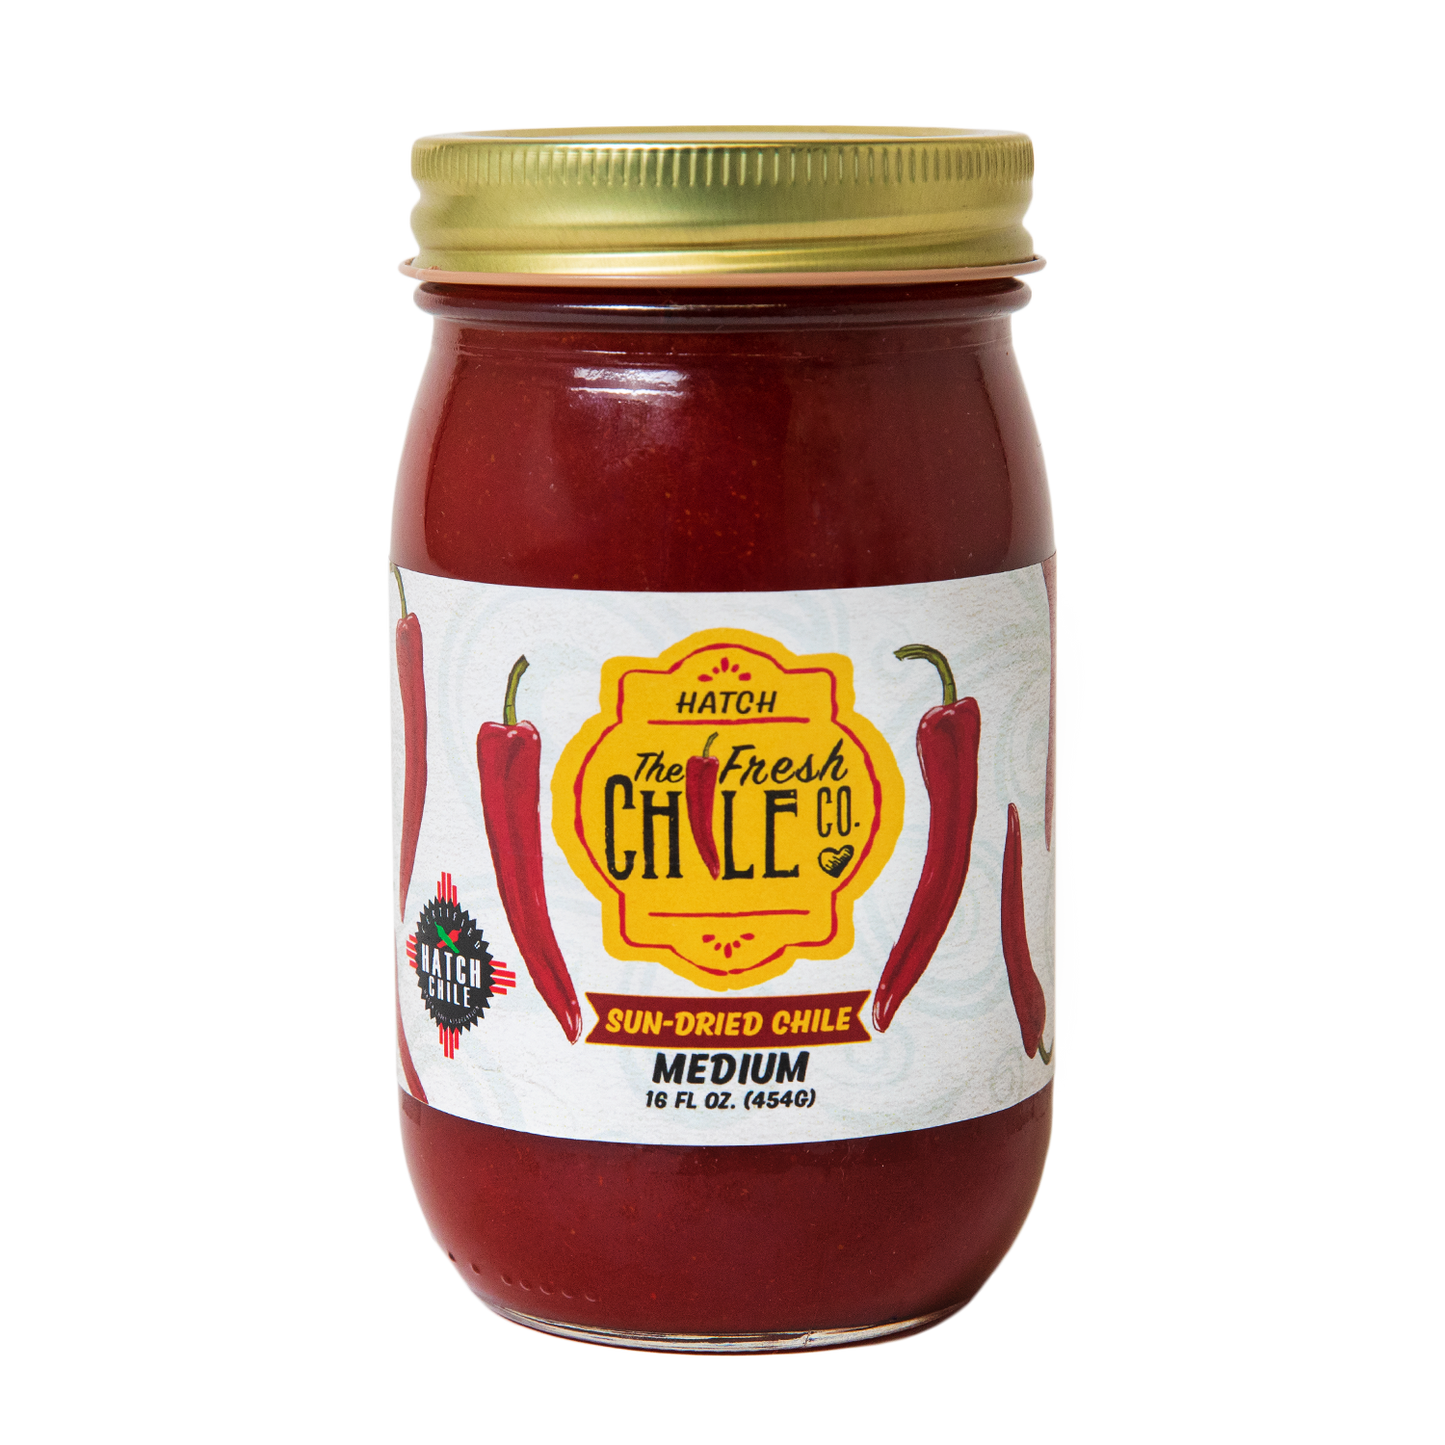 Hatch Red Chile Variety Pack - The Fresh Chile Company